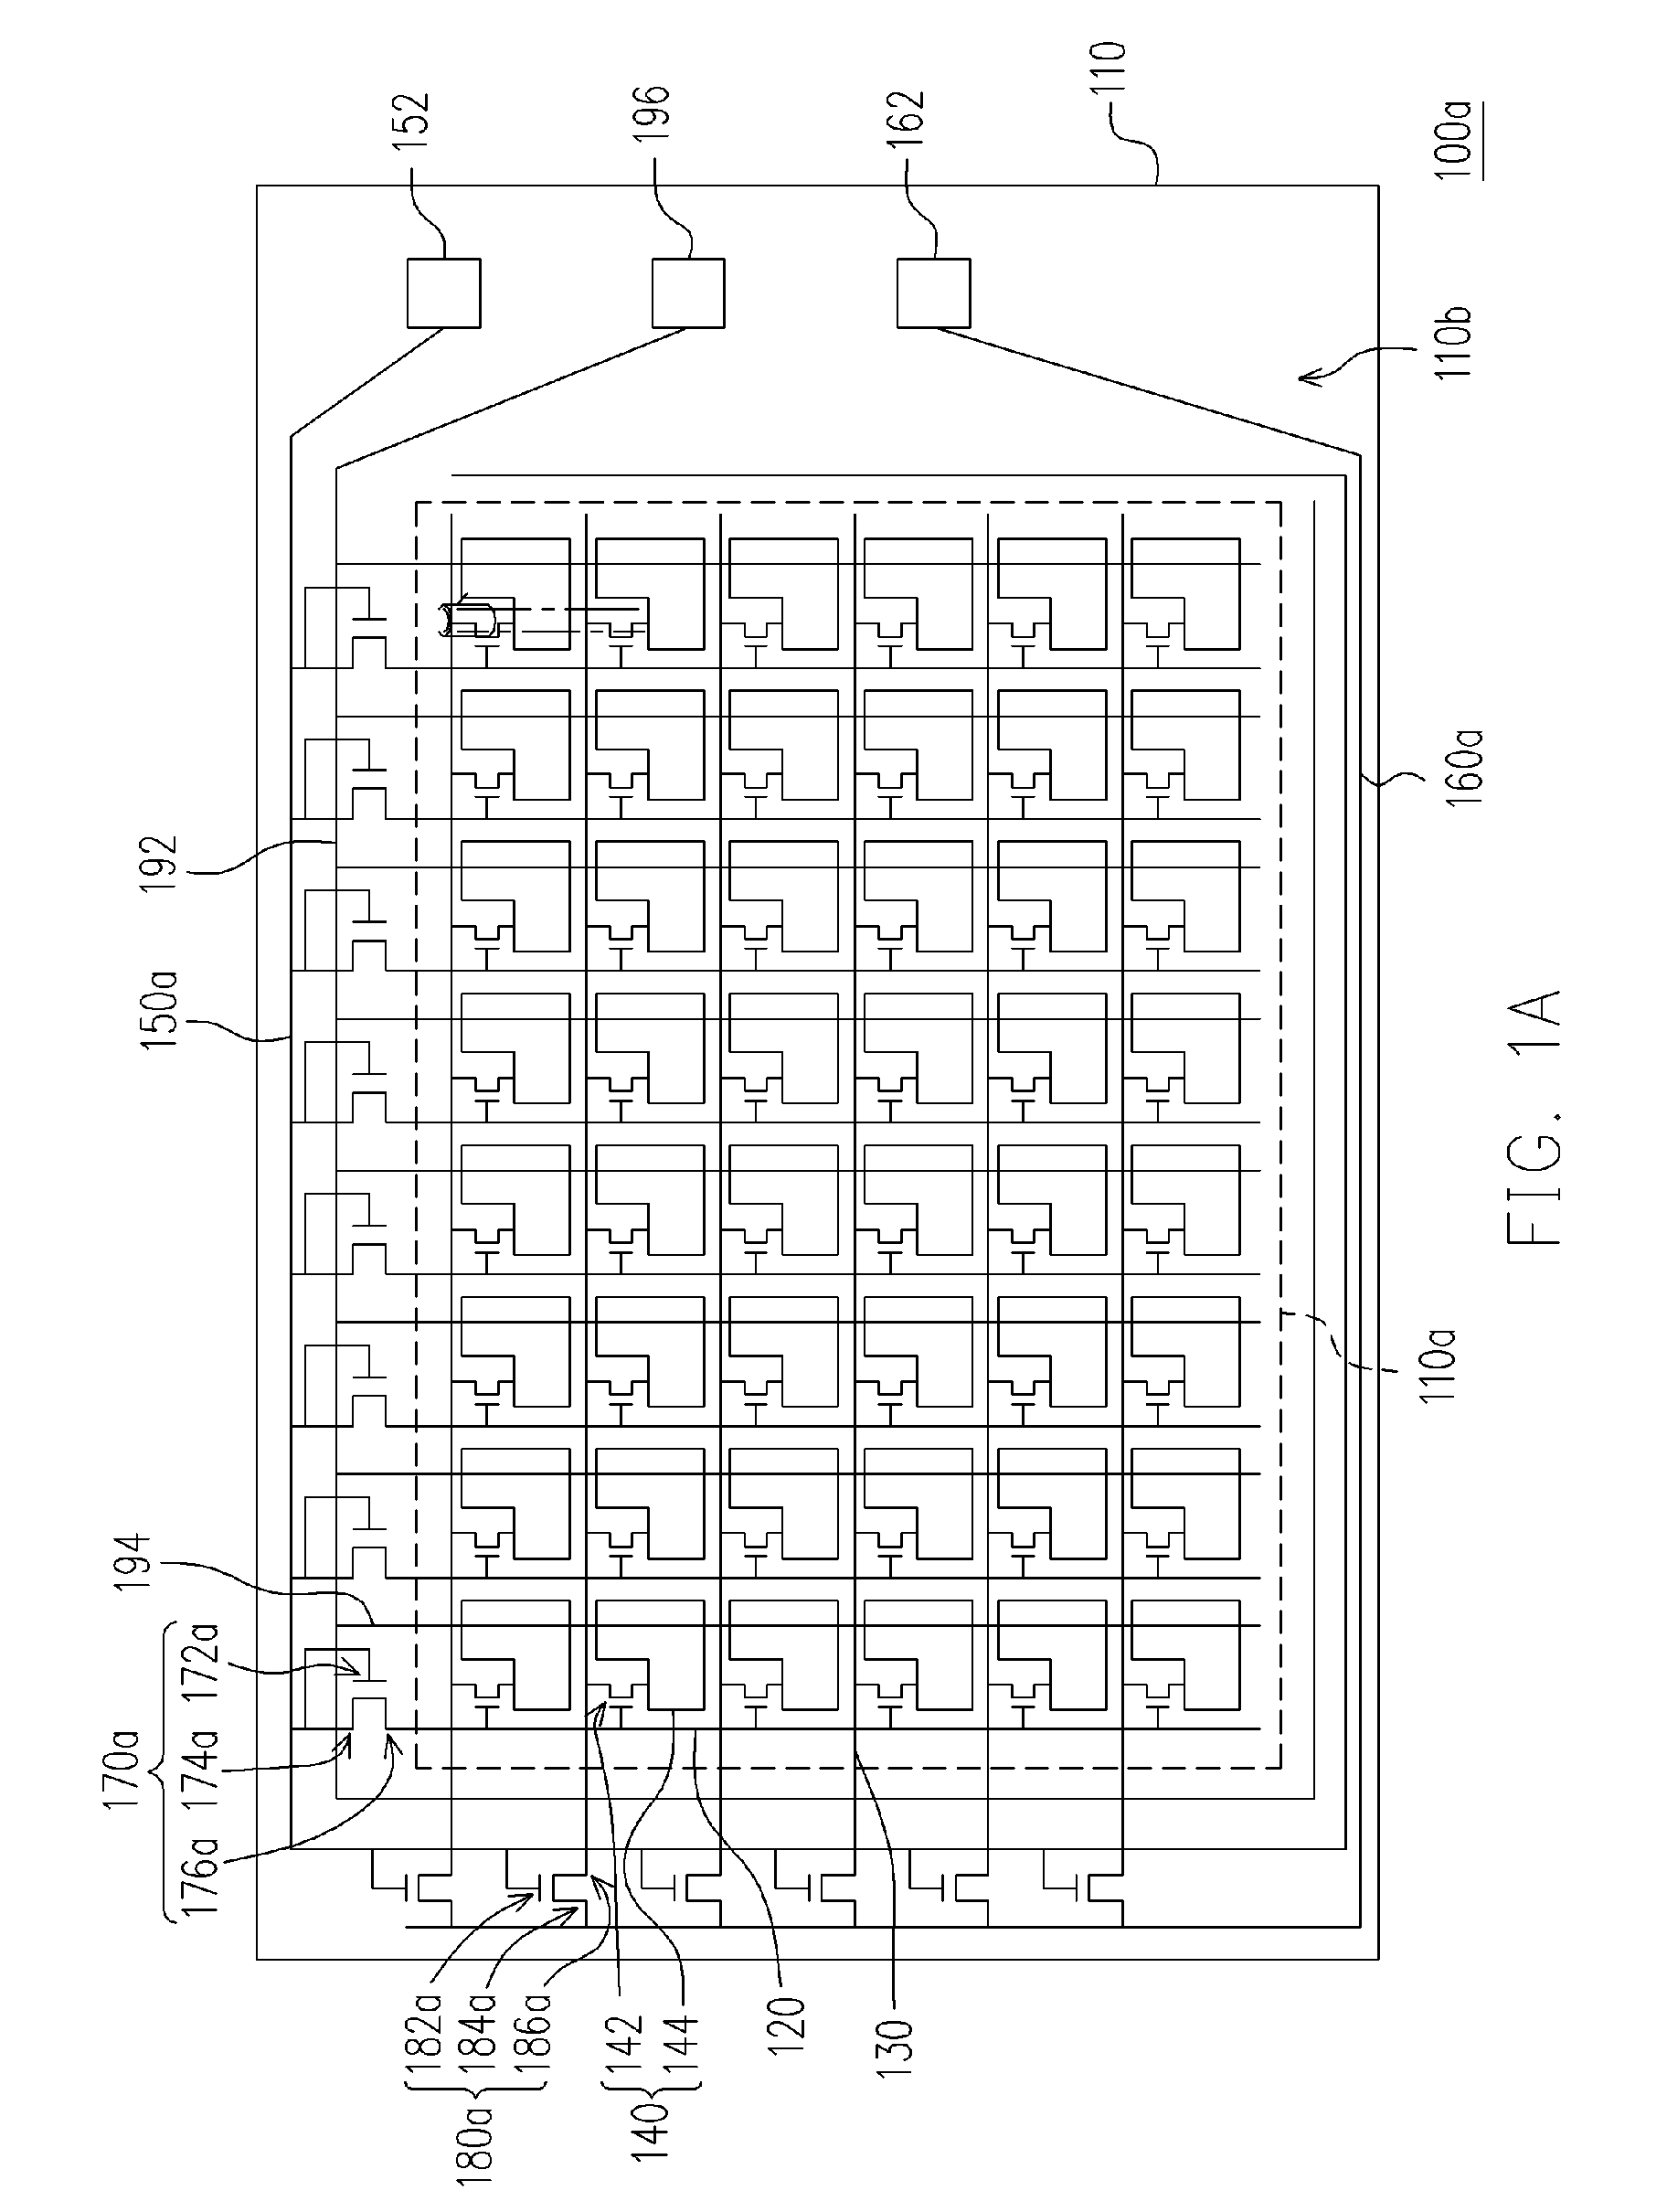 Liquid crystal display panel, thin film transistor array substrate and detection methods therefor